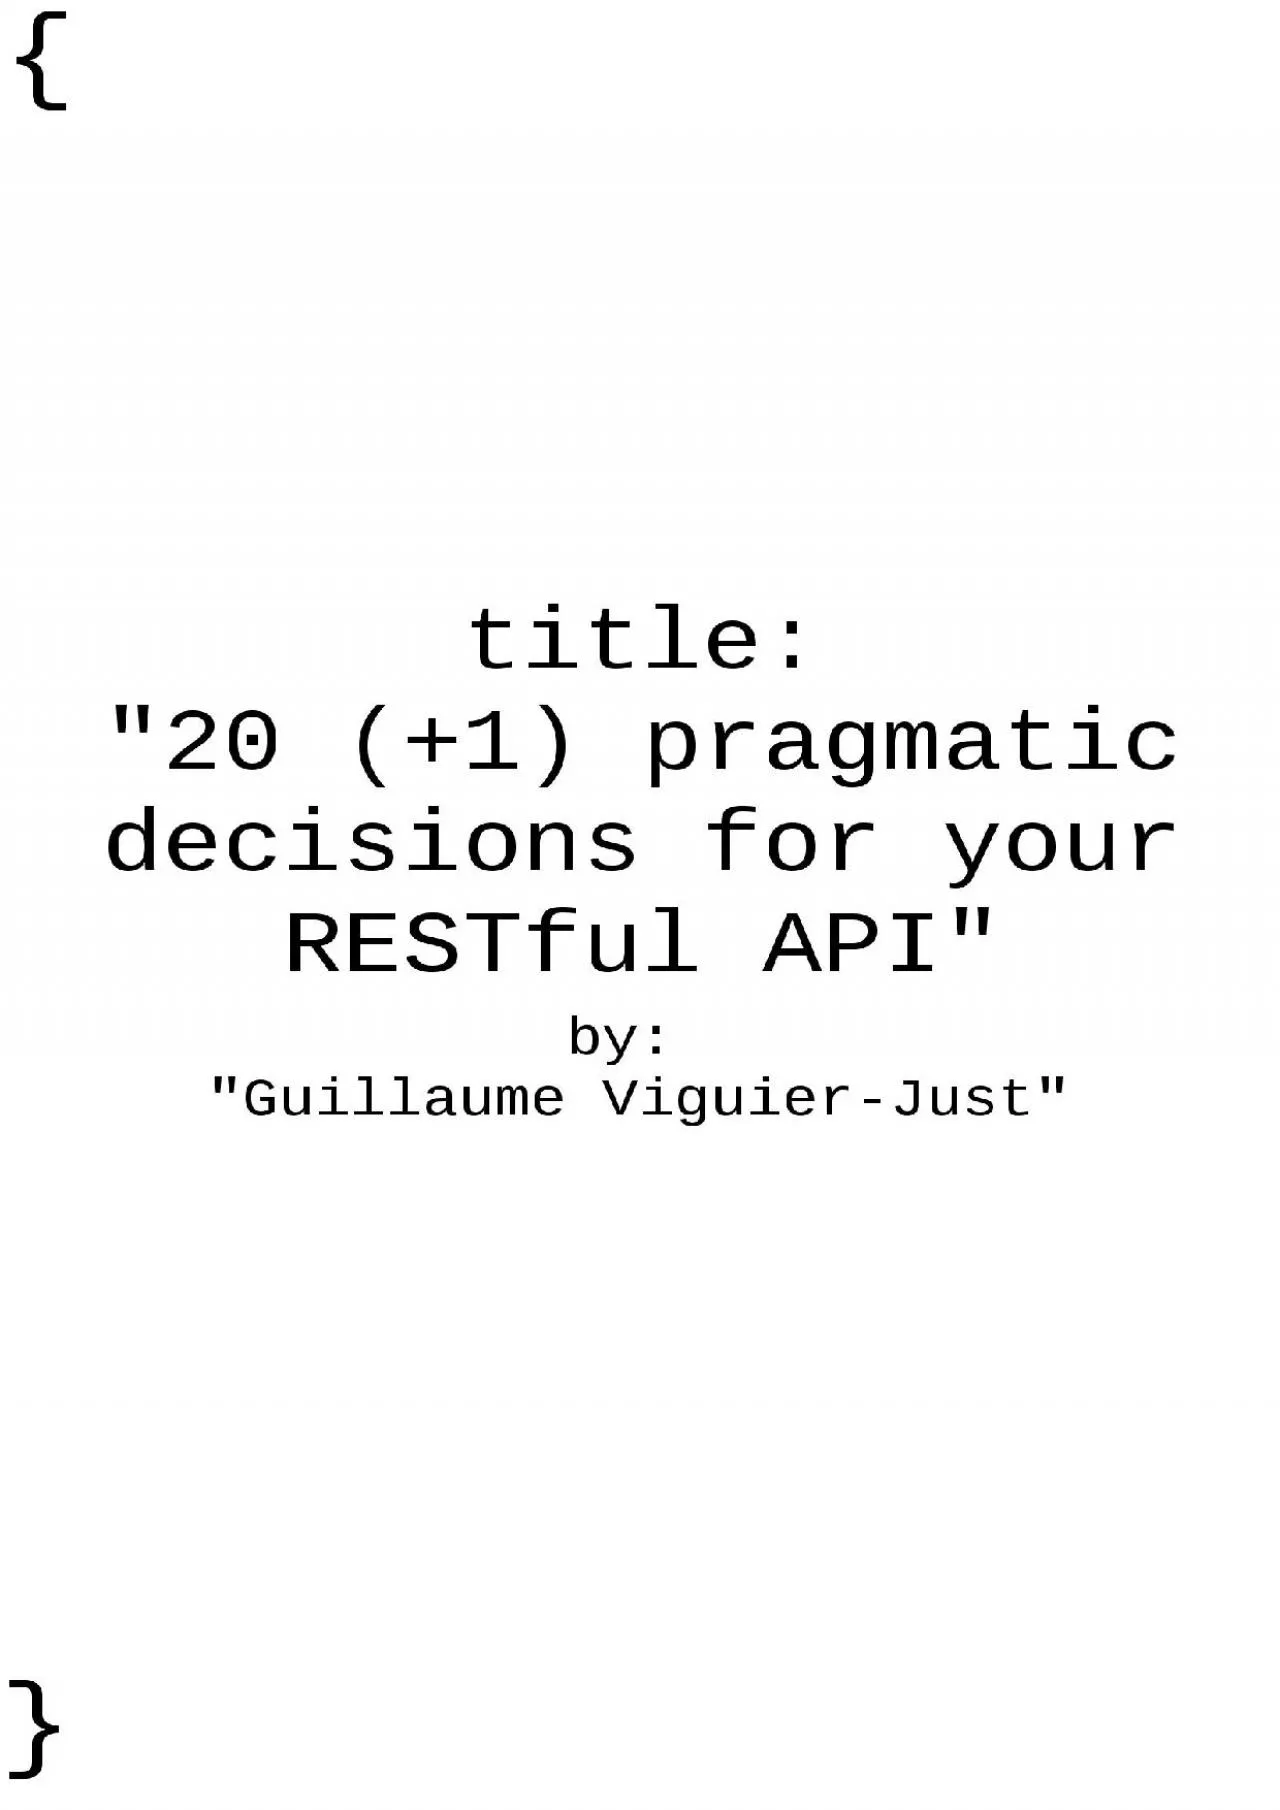 (DOWNLOAD)-20 (+1) pragmatic decisions for your RESTful API